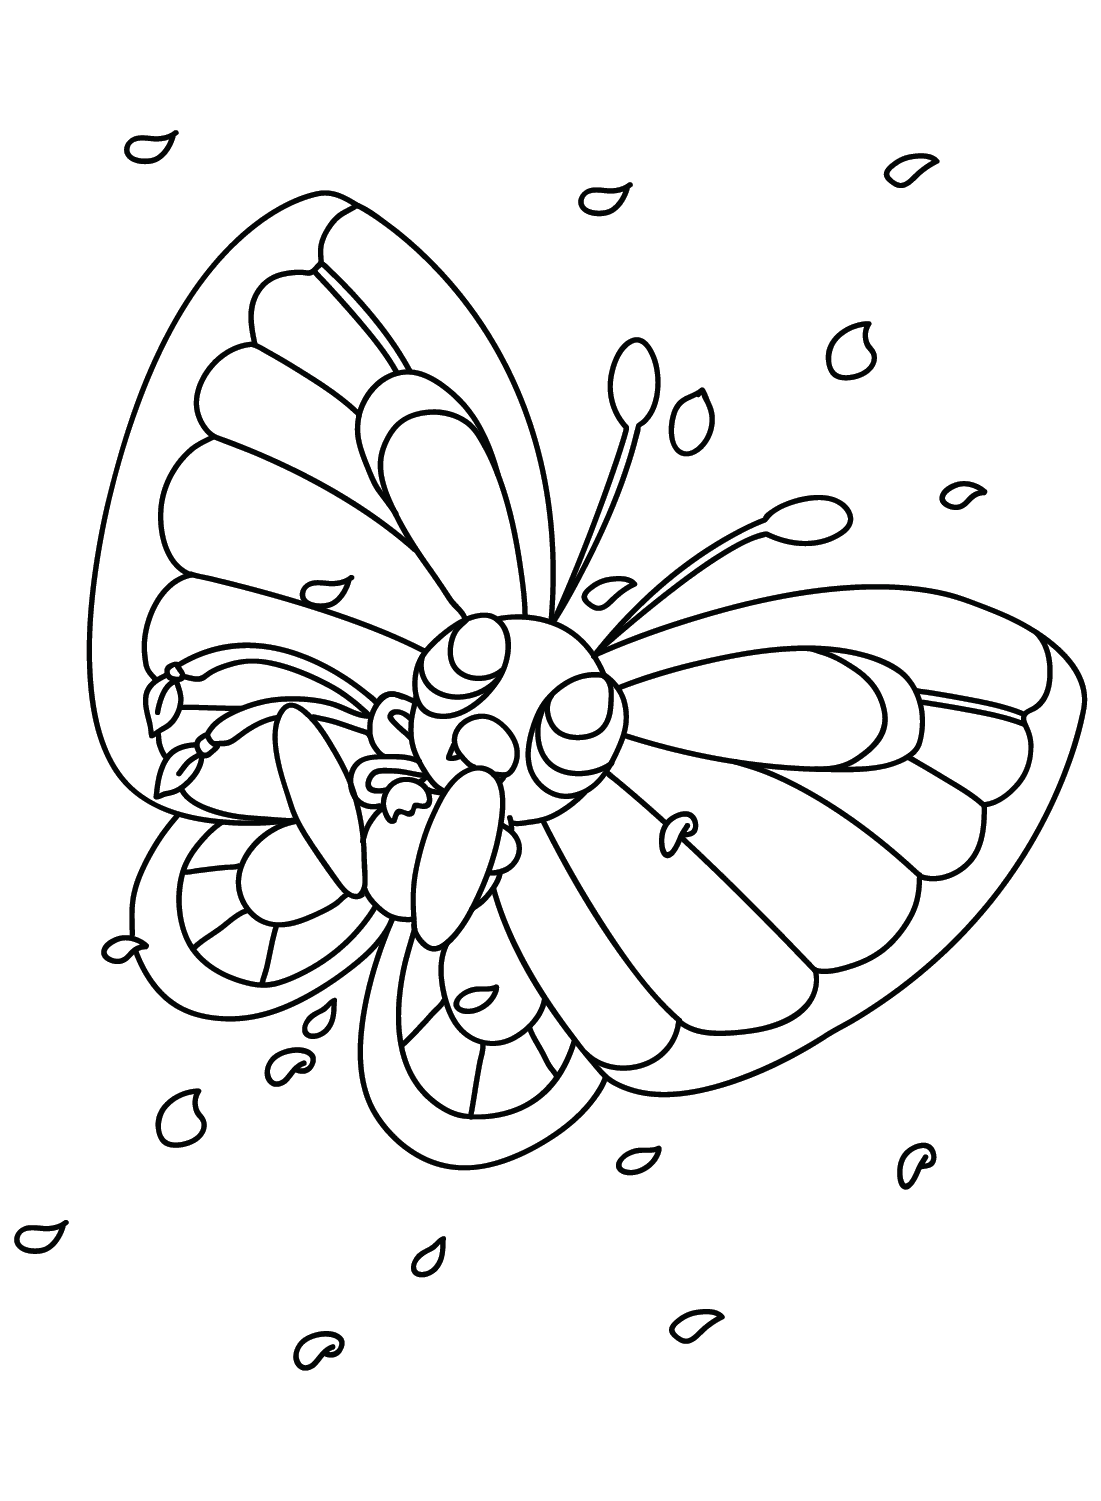 Butterfree Pokemon to Color from Butterfree